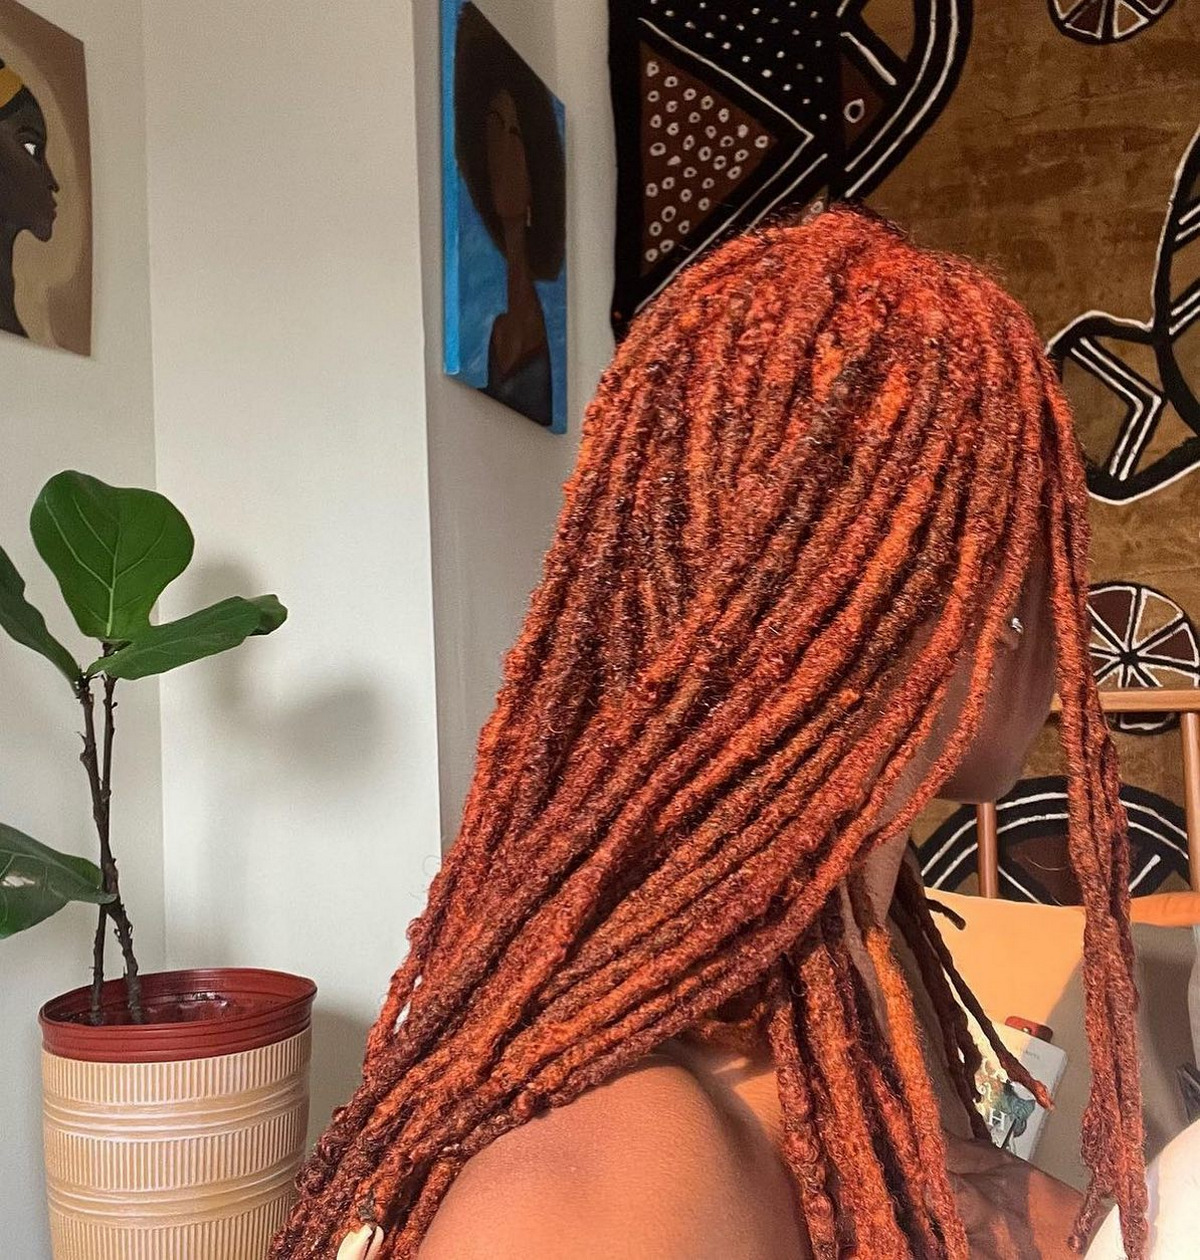 Outstanding red dyed dreads hairstyle